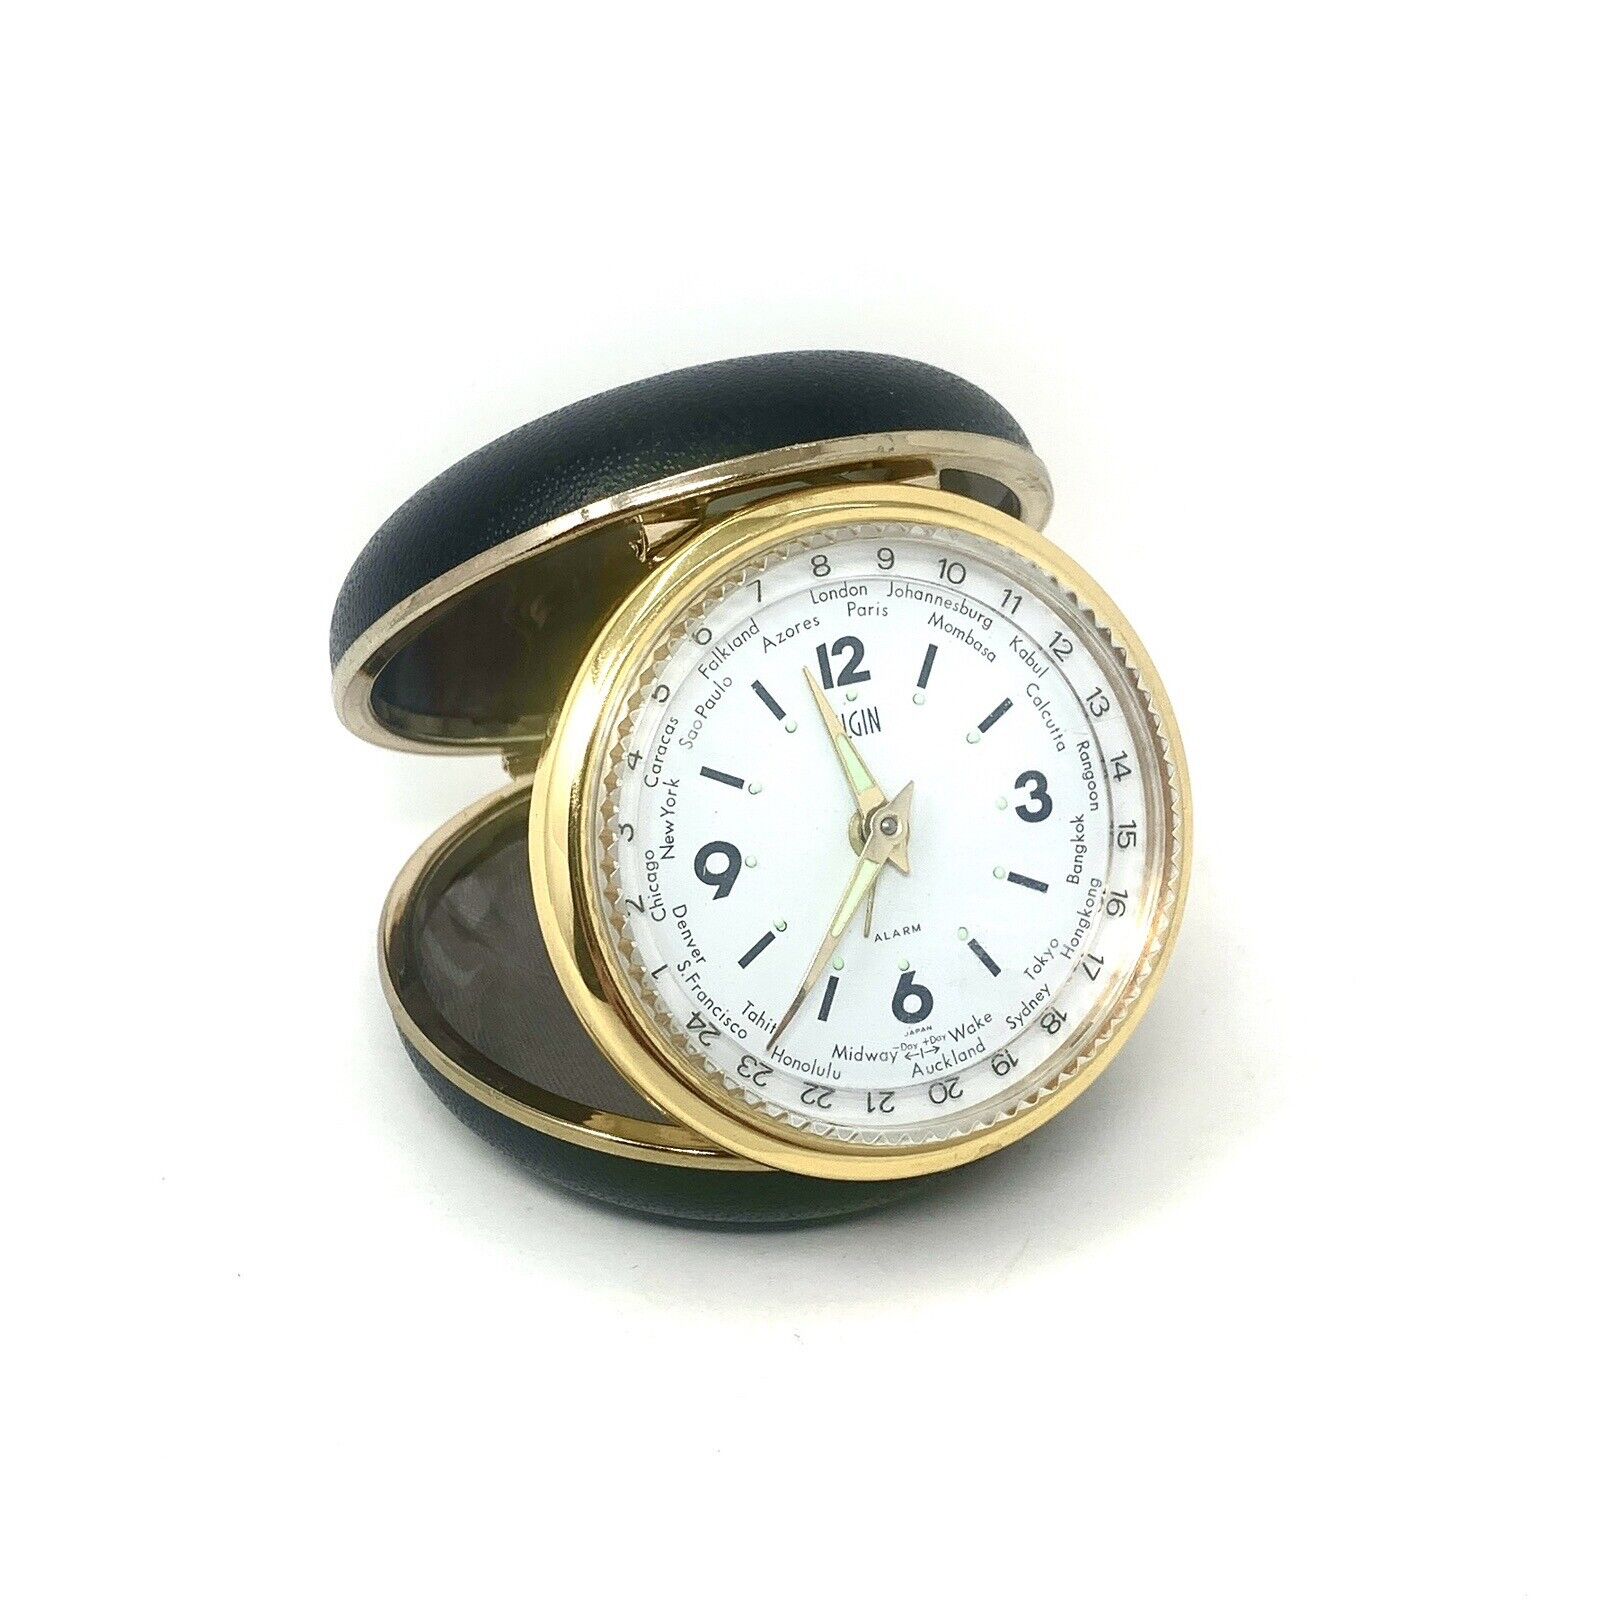 Elgin World Time Travel Clock Clam Shell Case - Glowing Hands/Numbers Japan Made